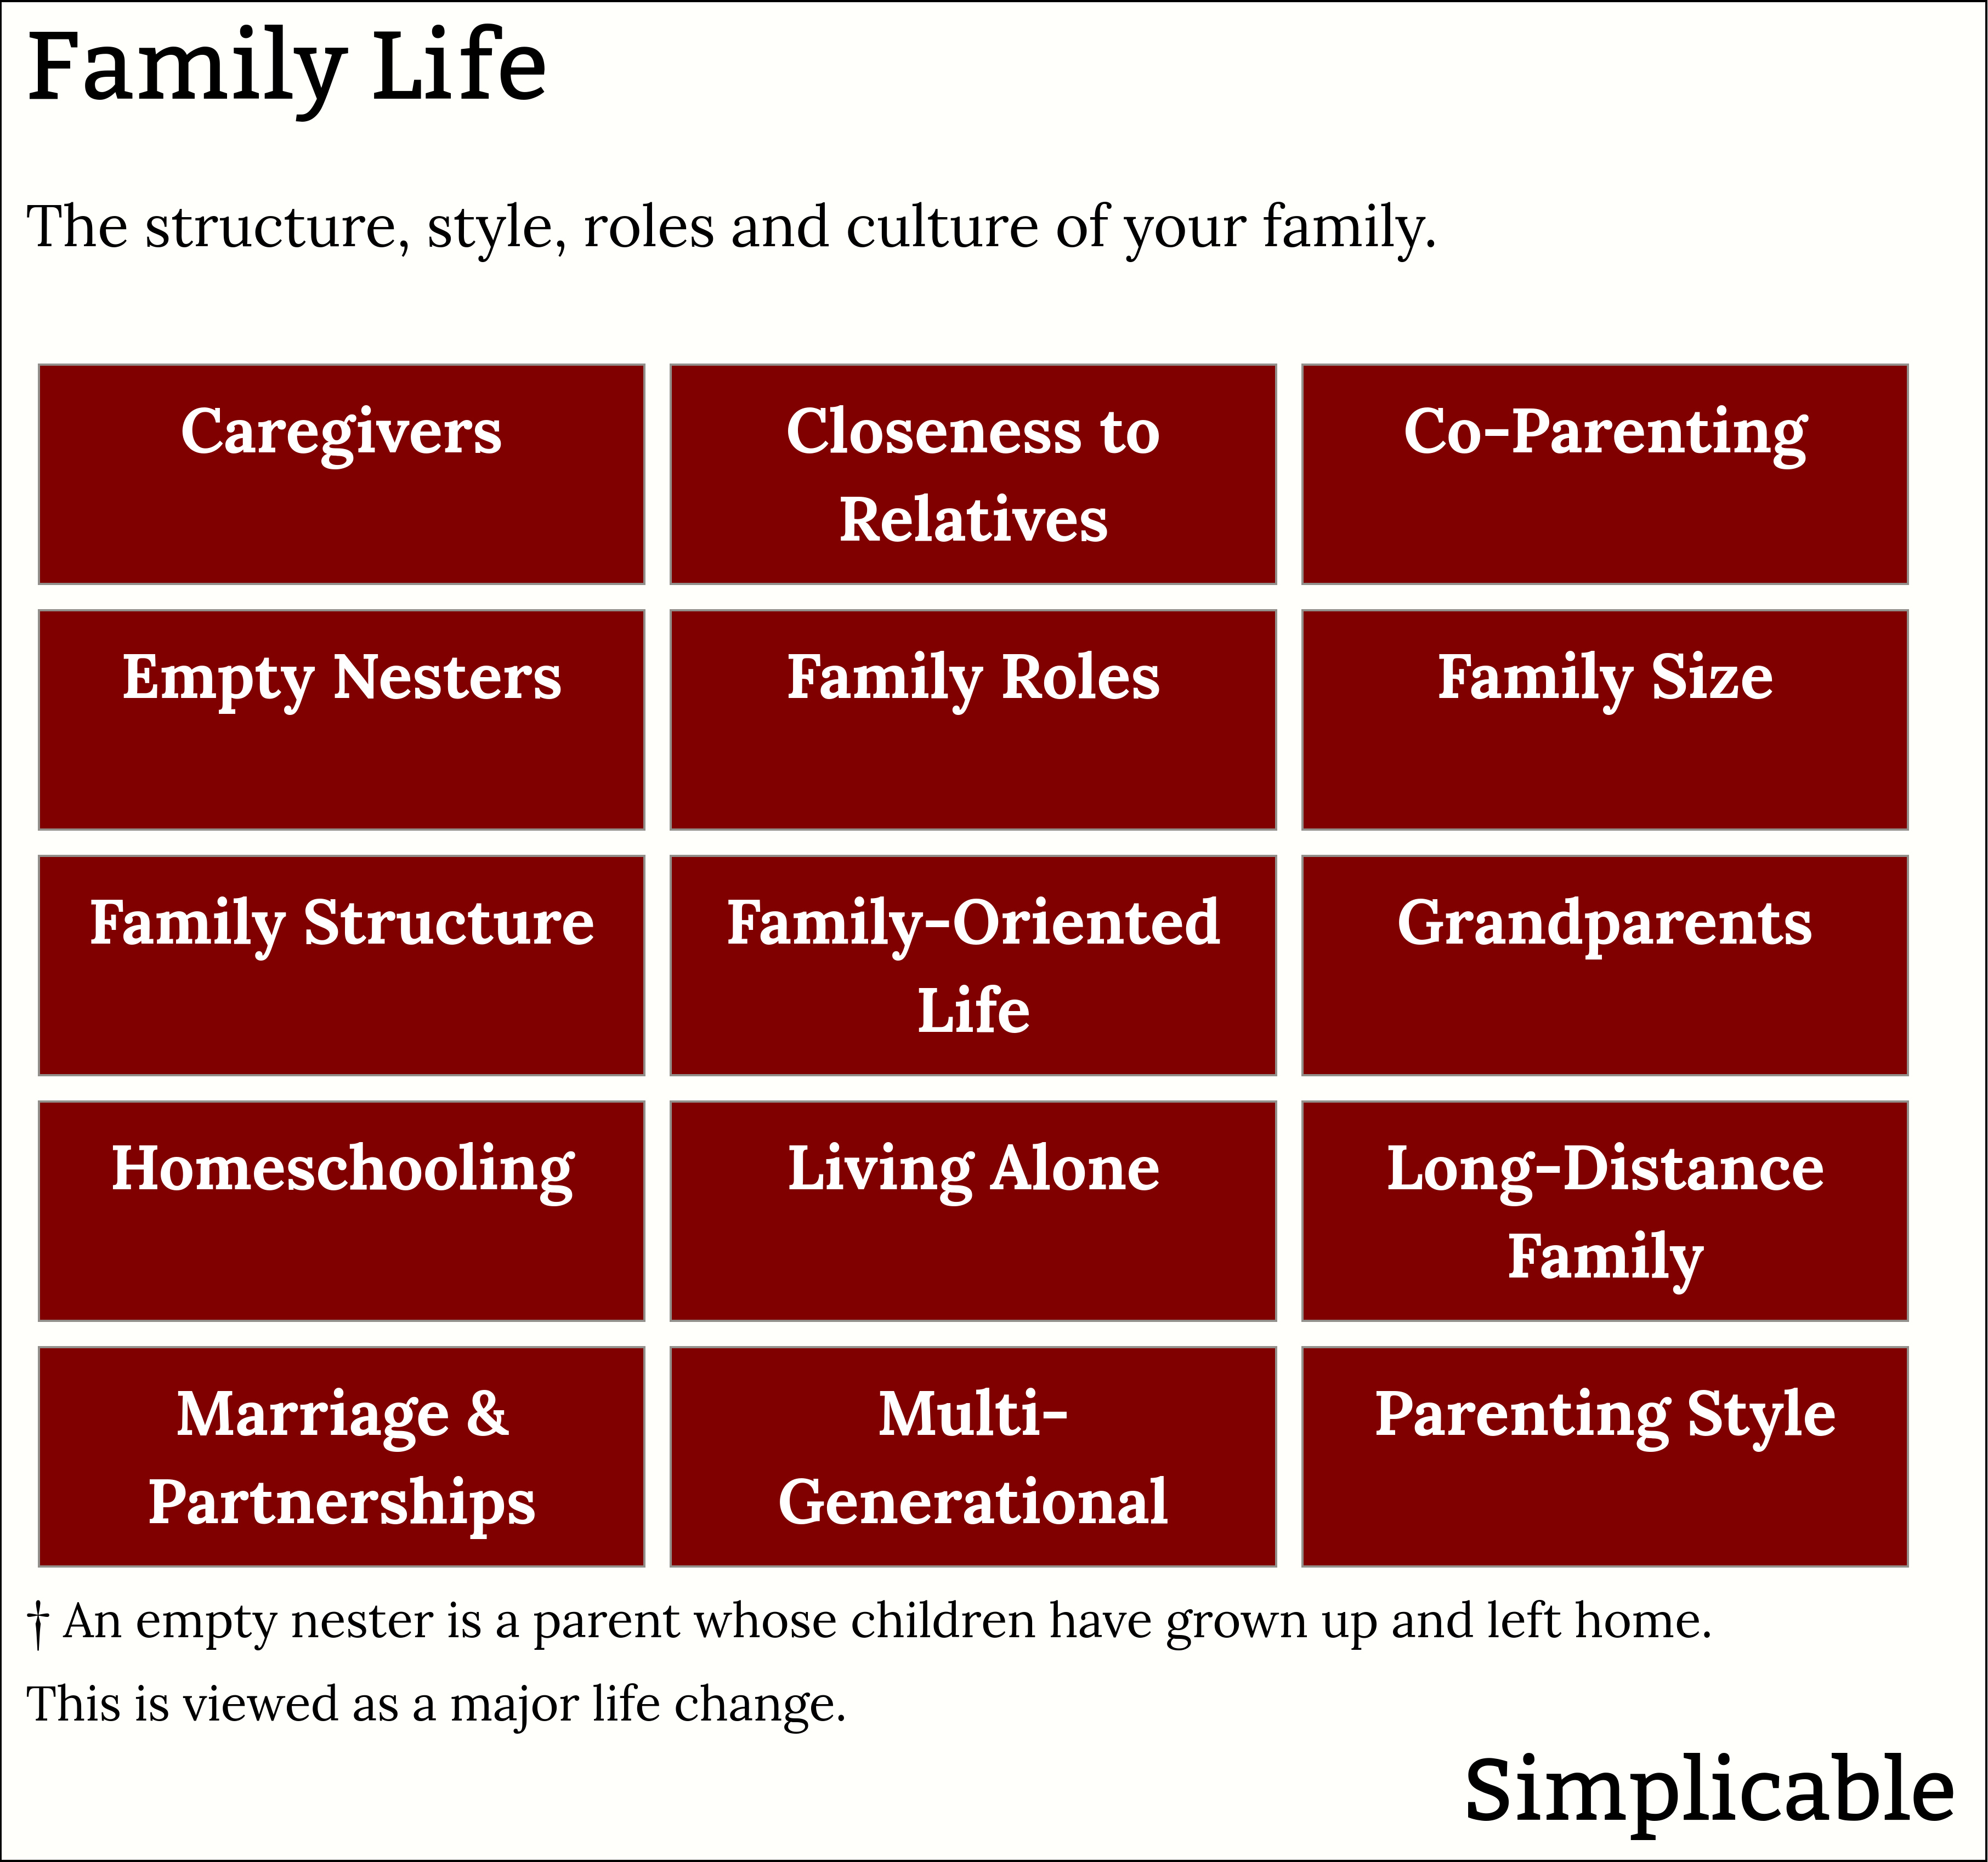 lifestyles related to family